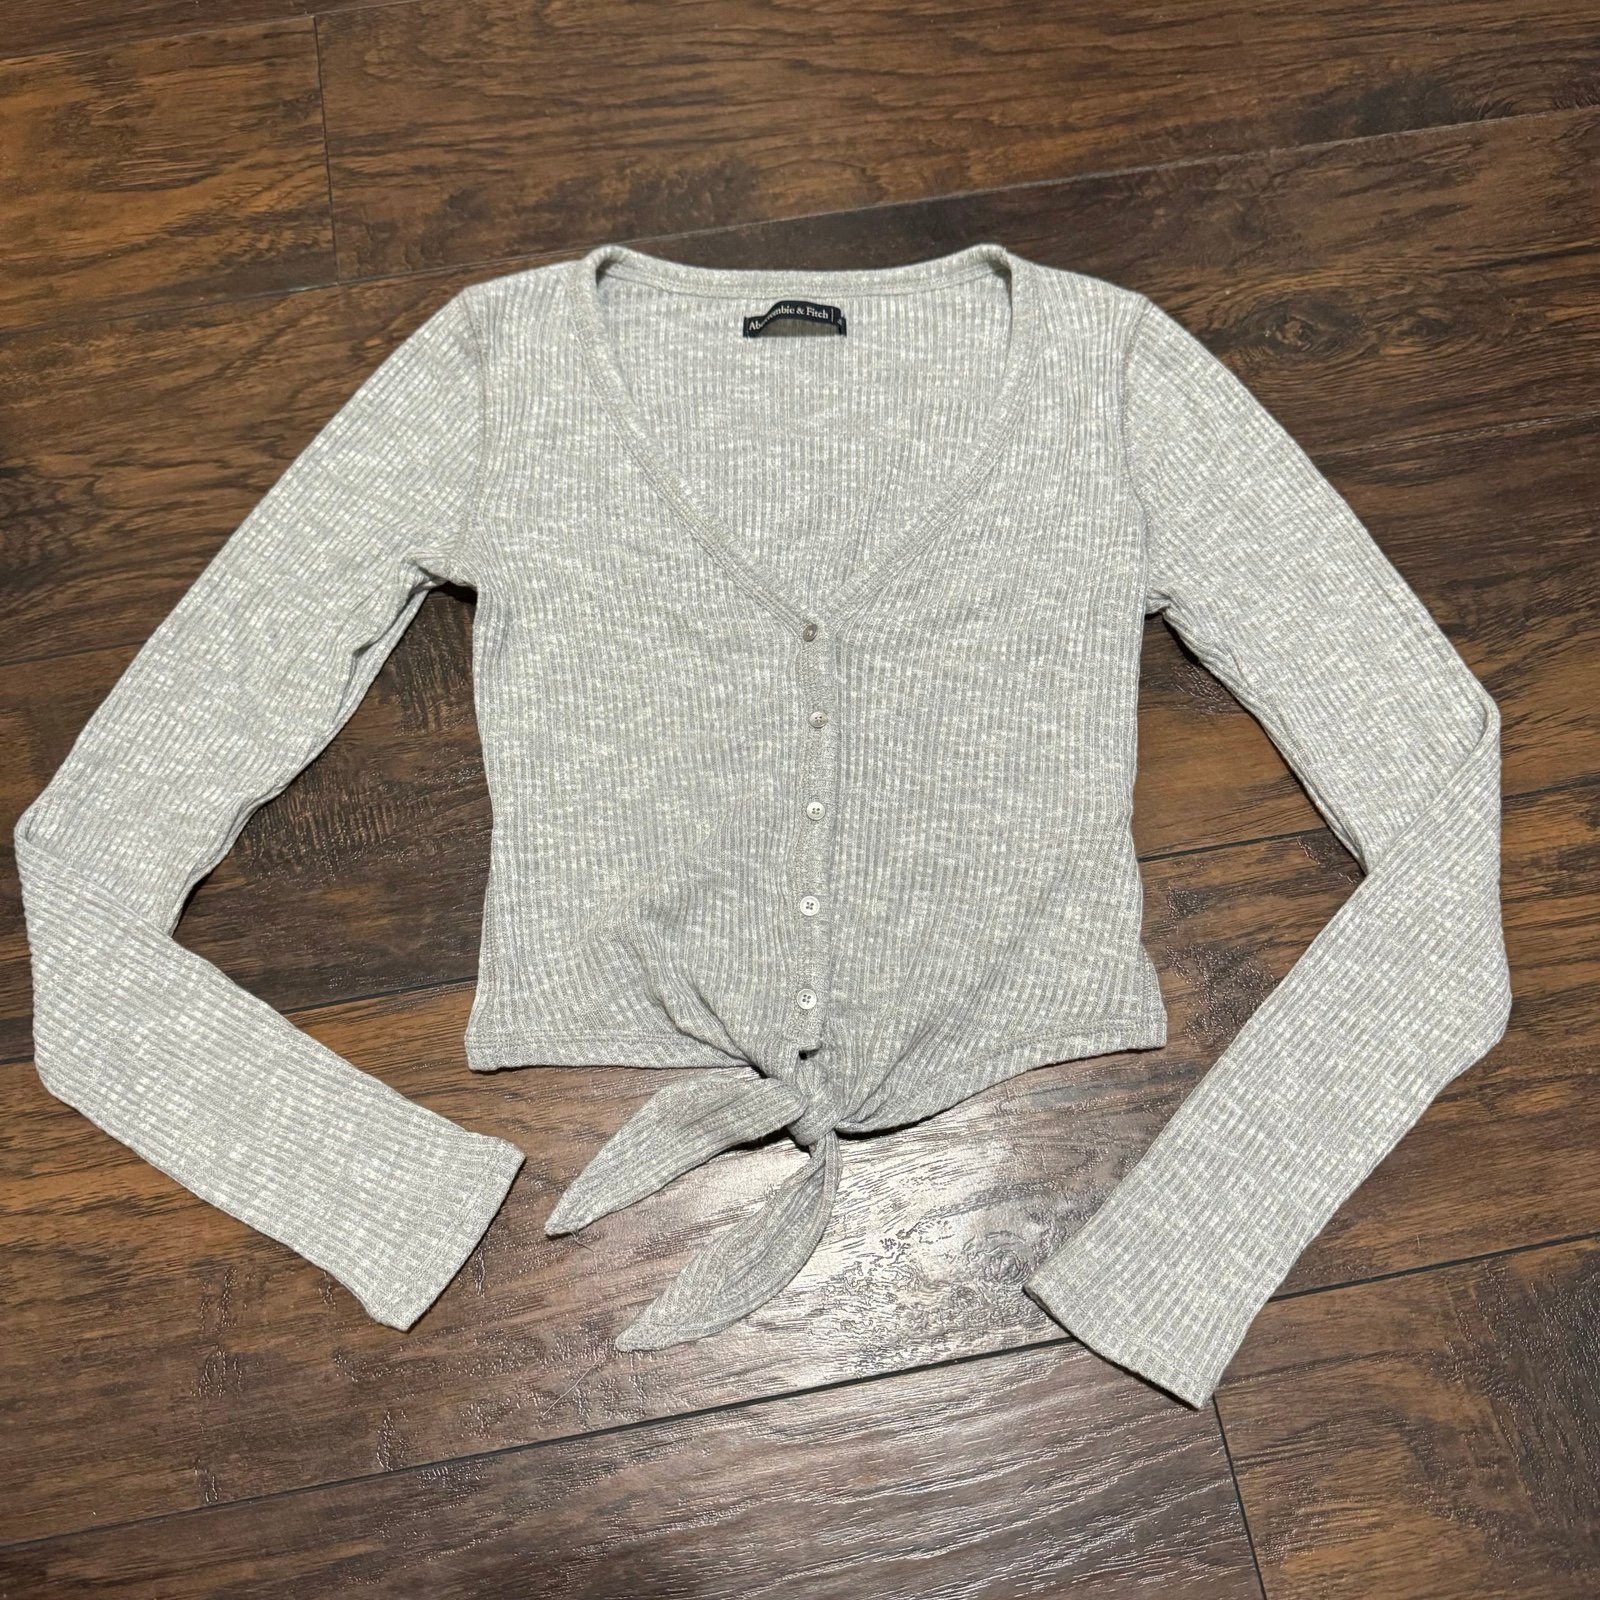 the Lowest price Abercrombie and Fitch Long Sleeve Tie Front Crop Sweater - Gray S koqeLTYBA Novel 